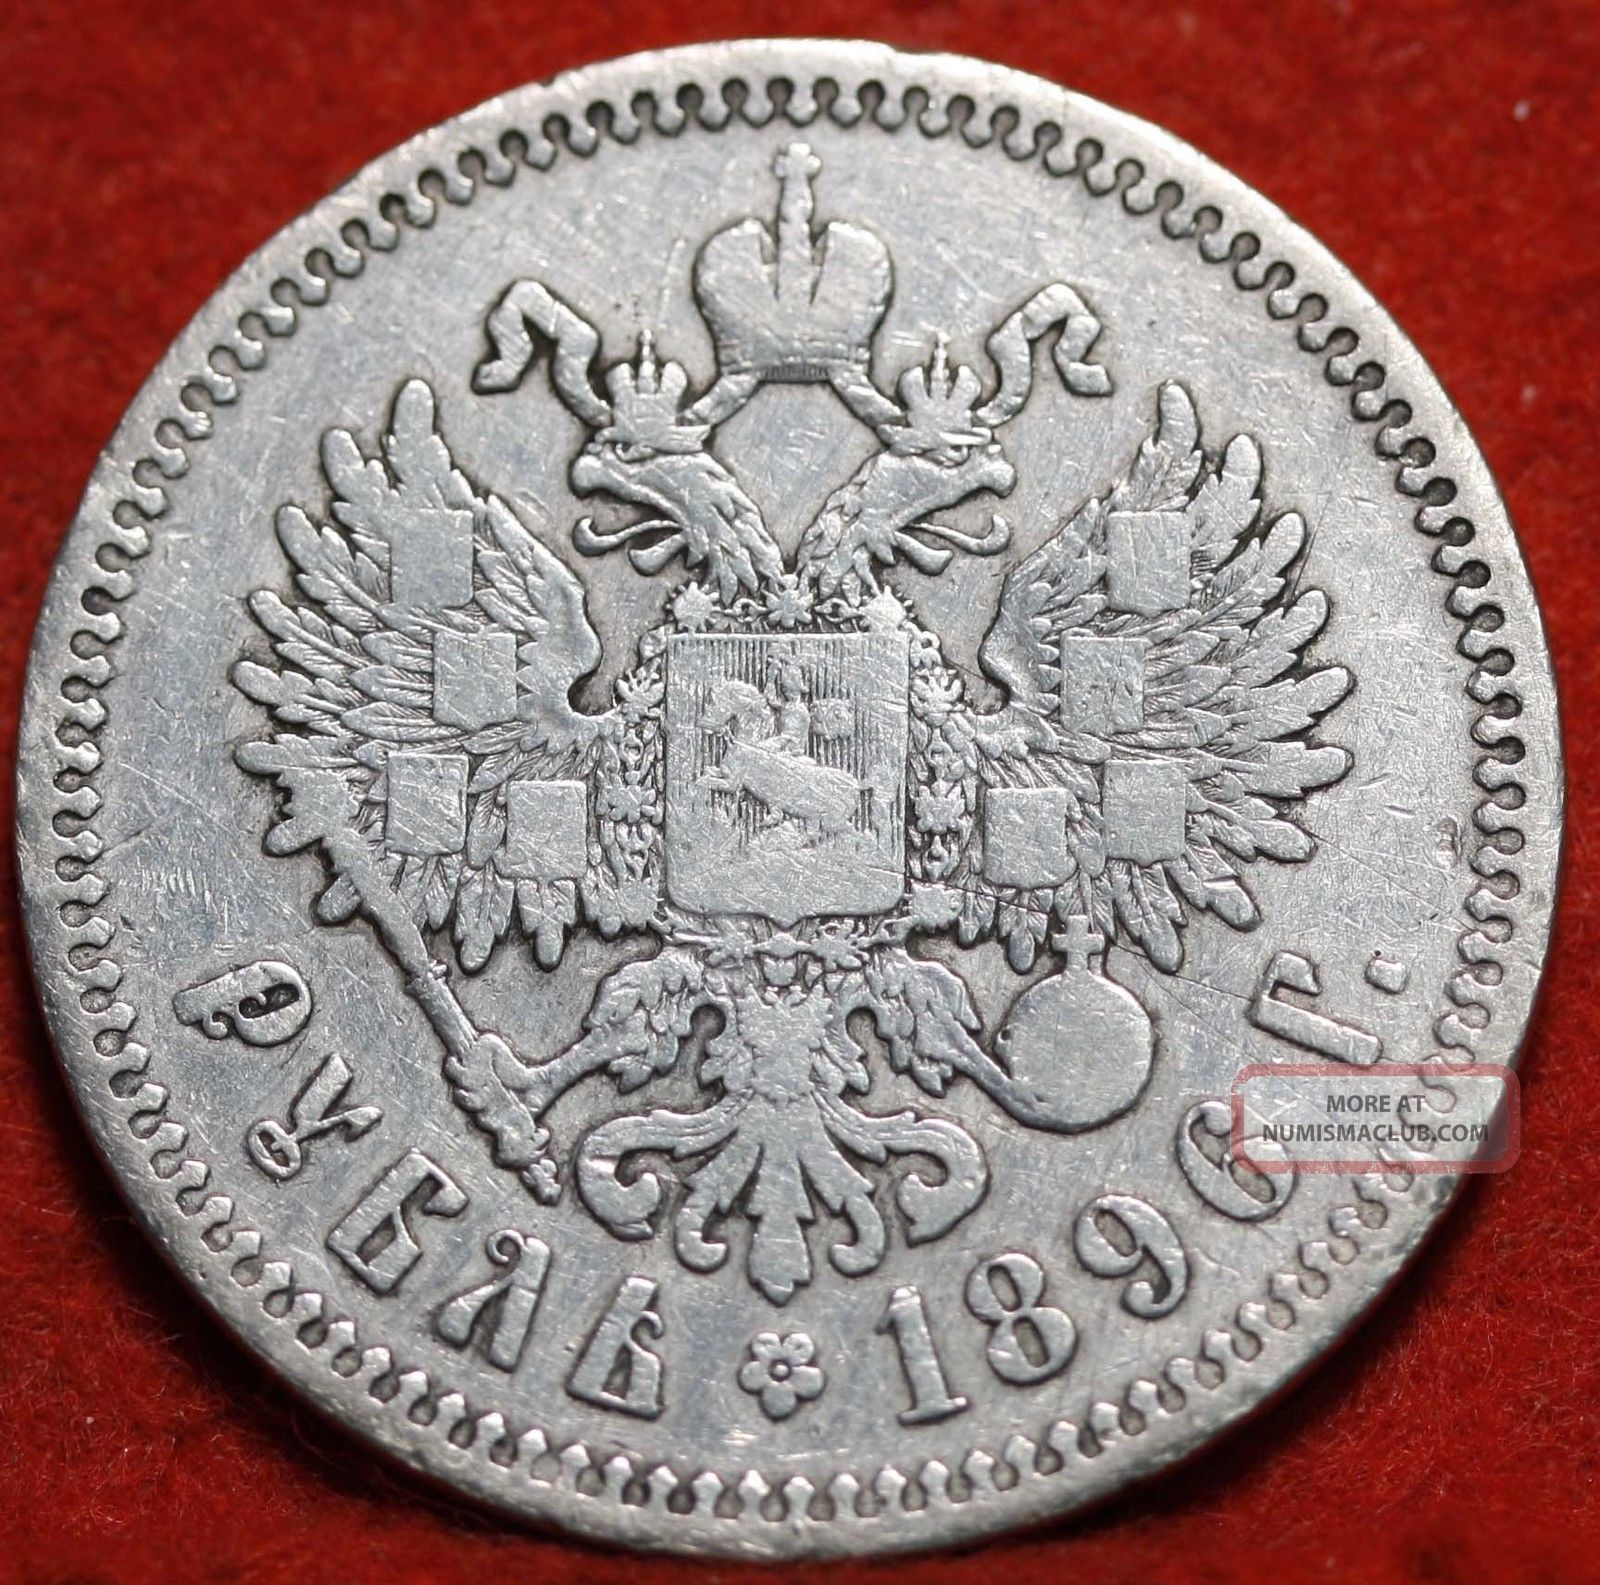 Circulated 1896 Russia 1 Rouble Silver Foreign Coin S/h